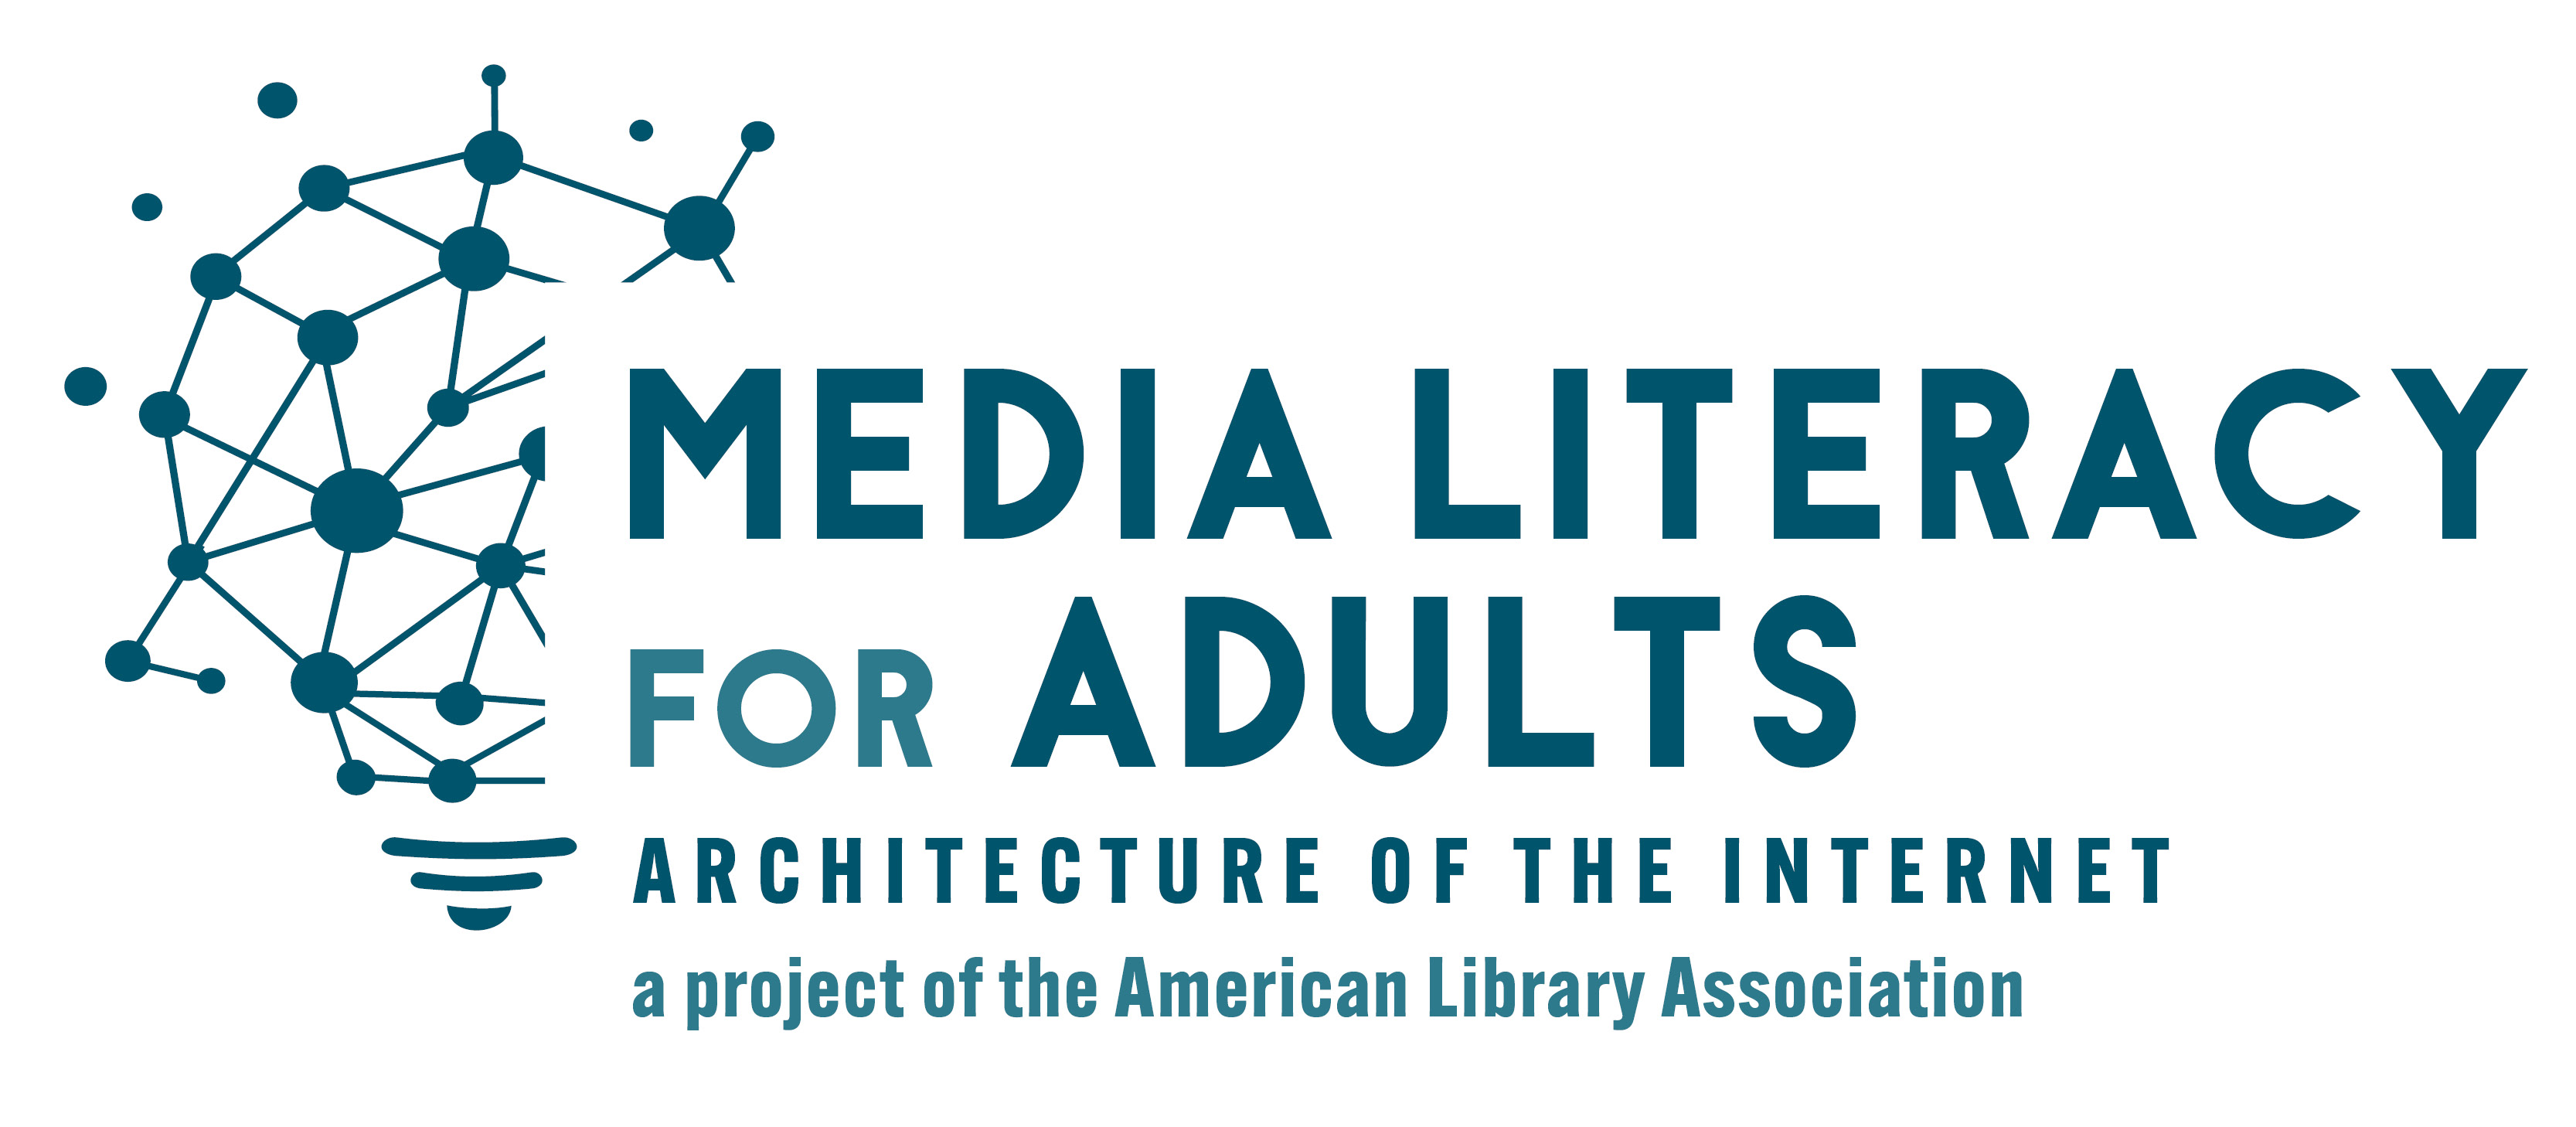 Illustration of a lightbulb. Text reads: Media Literacy for Adults: Architecture of the Internet a project of the American Library Association